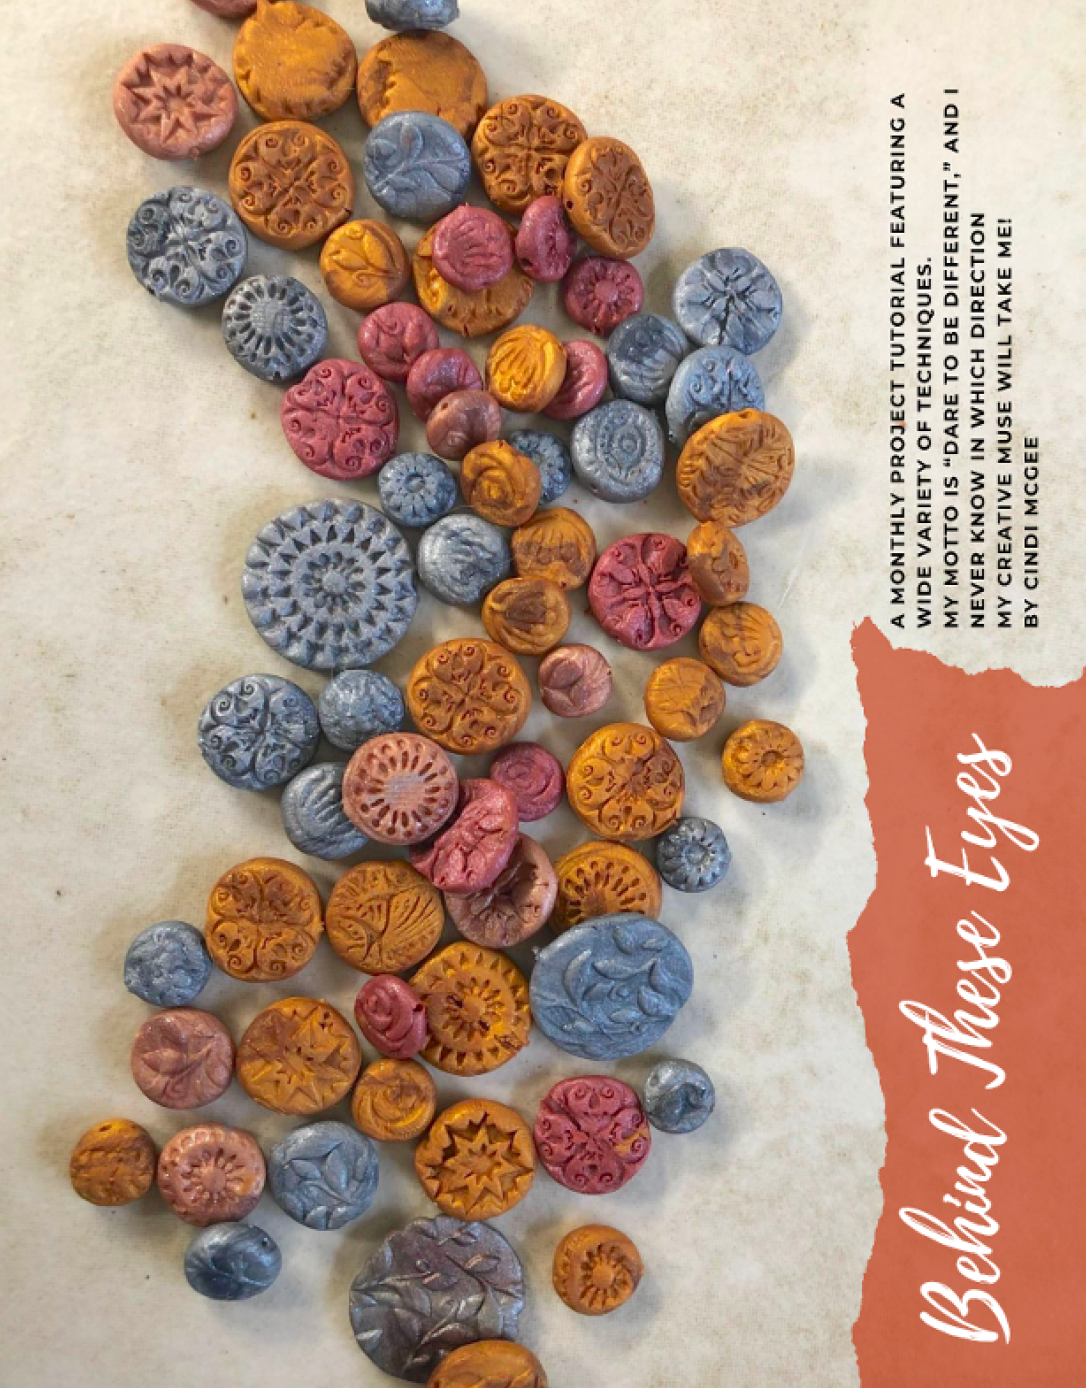 Polymer Clay Components Tutorials Magazine: January 2022 Passion for Polymer Clay DIGITAL Downloadable PDF